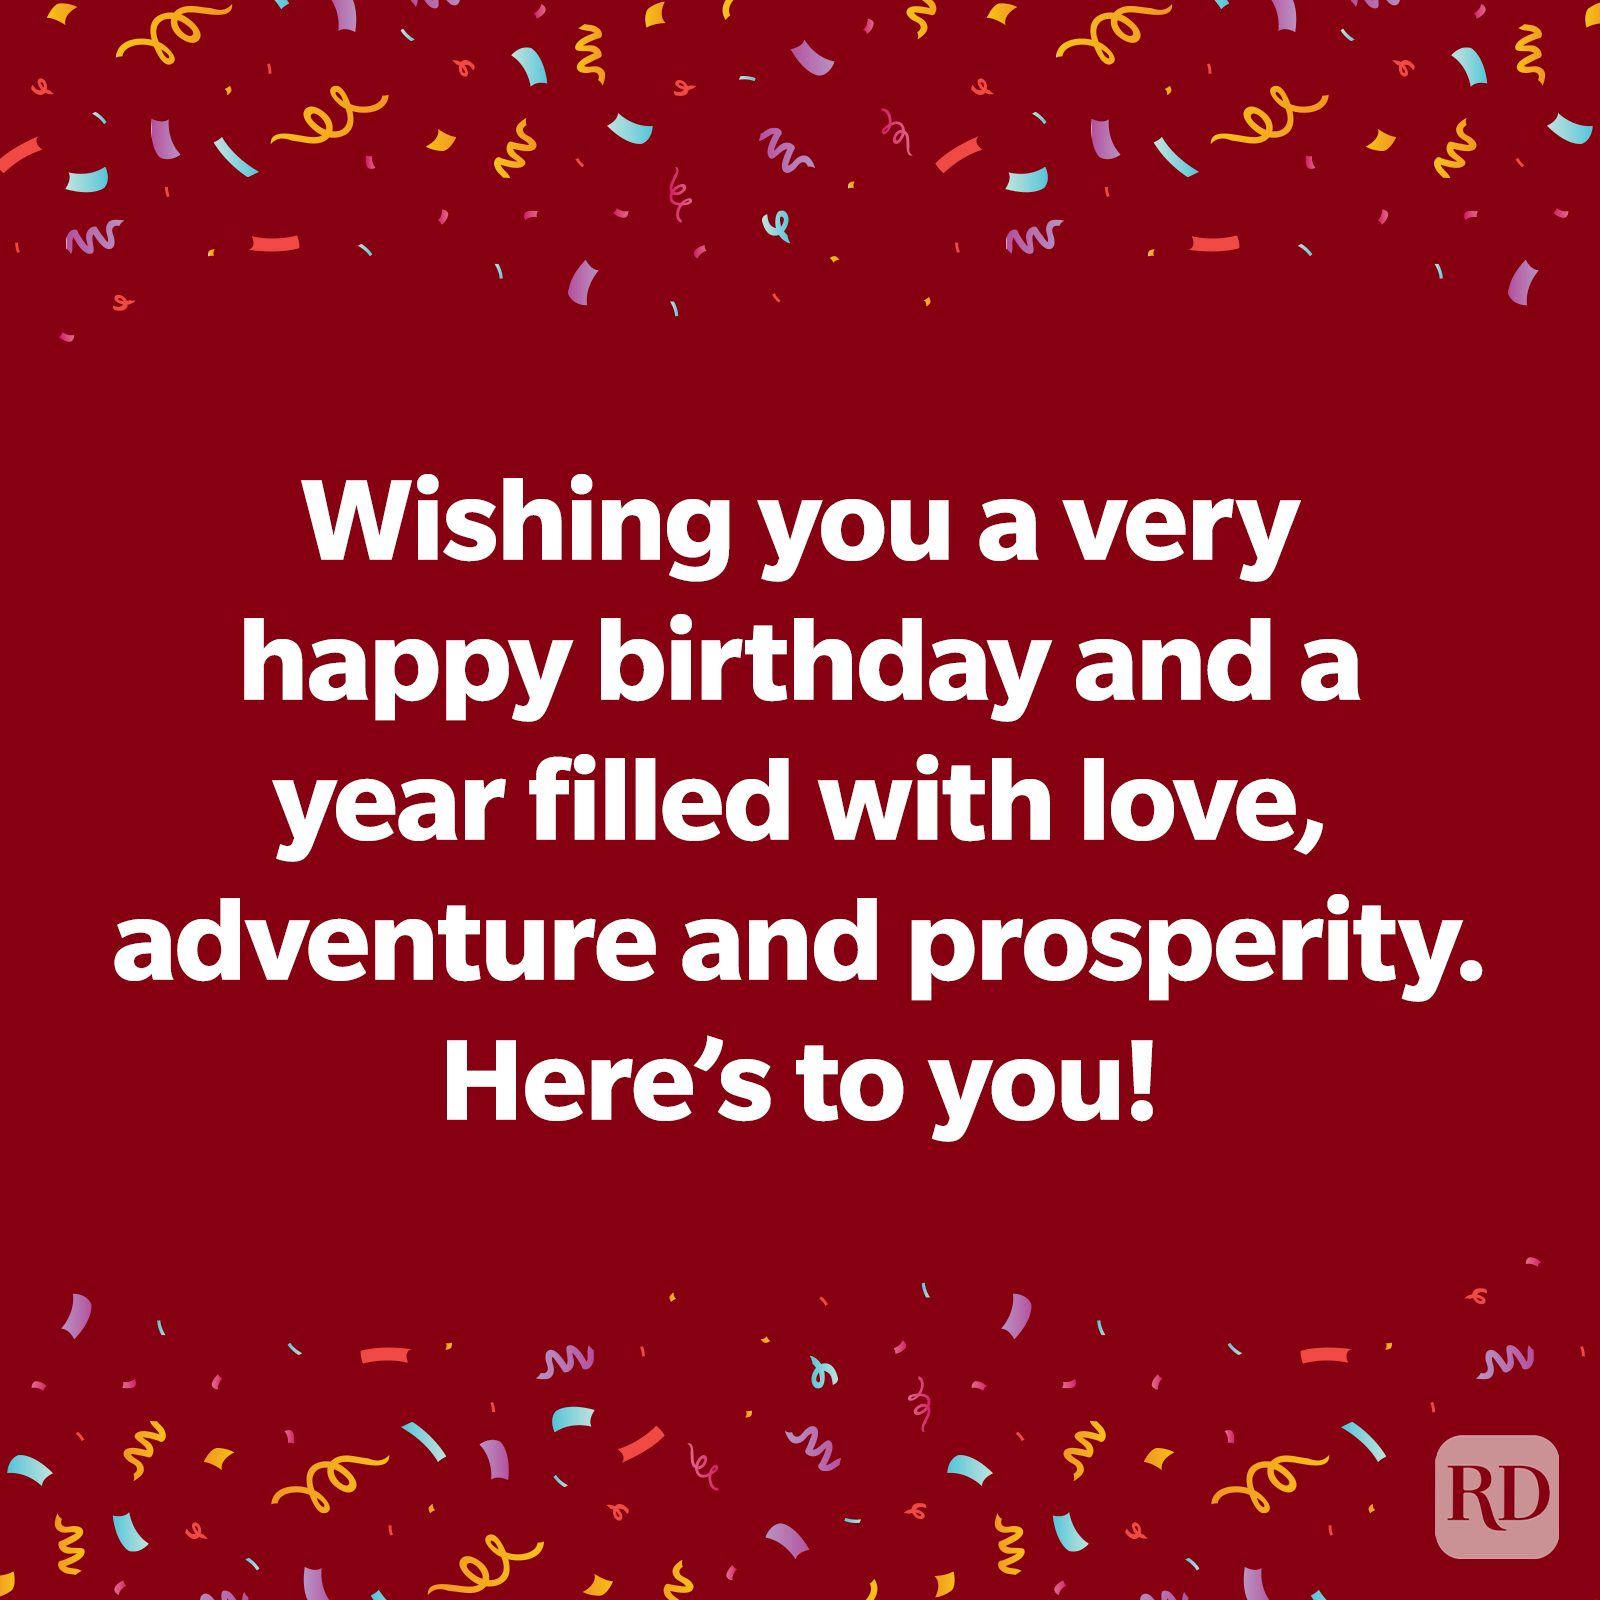 Happy Birthday Message on red background